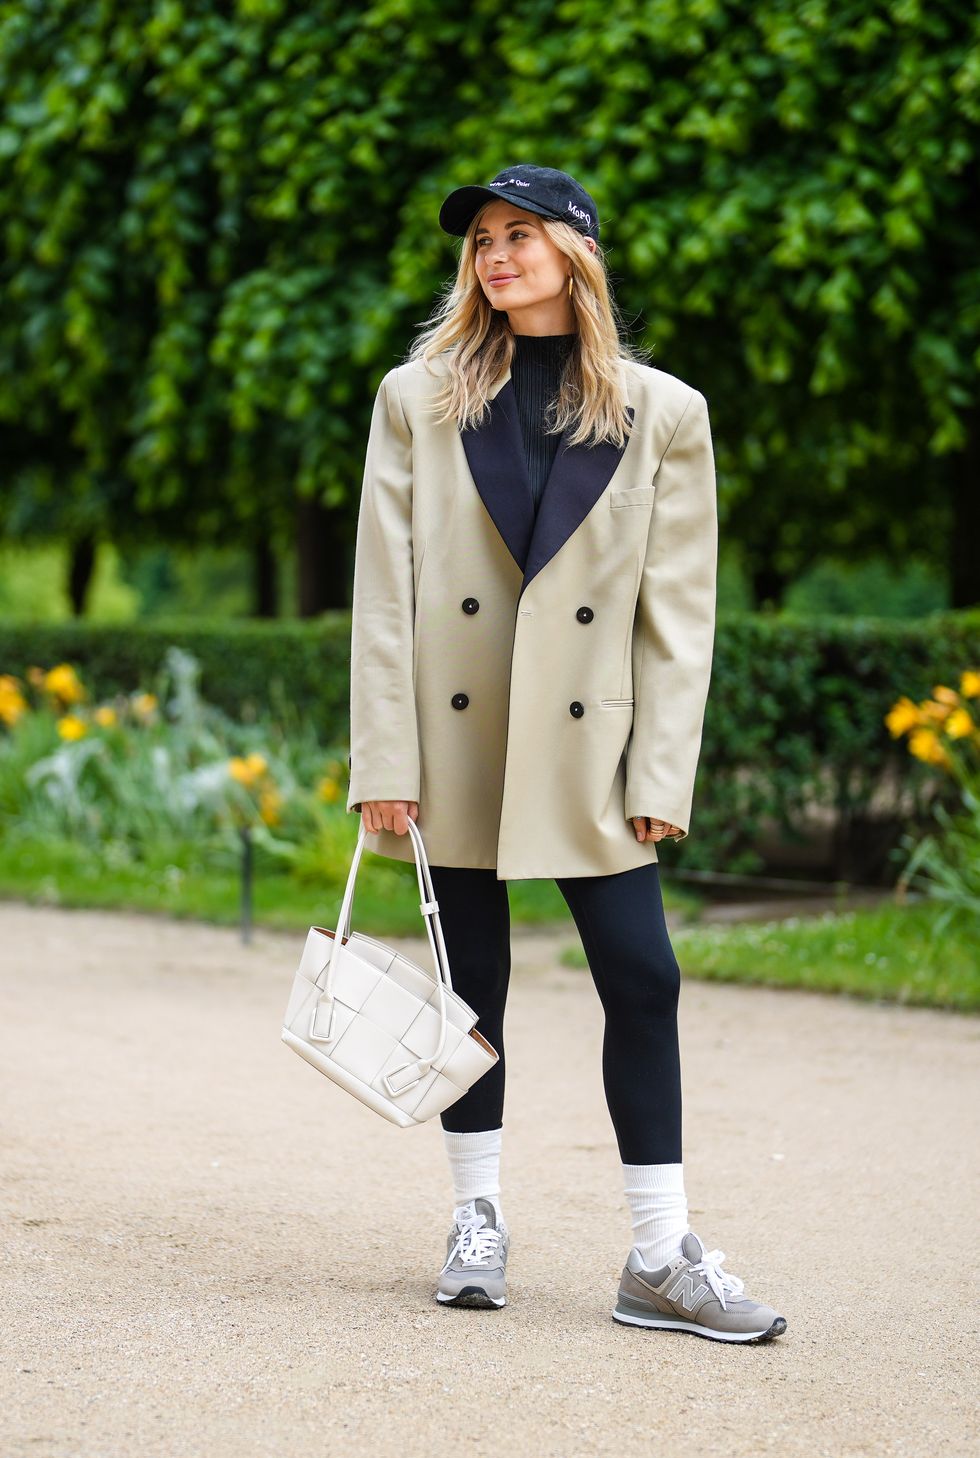 leggings, new balance, trench coat, outfit of the day, ootd, cap